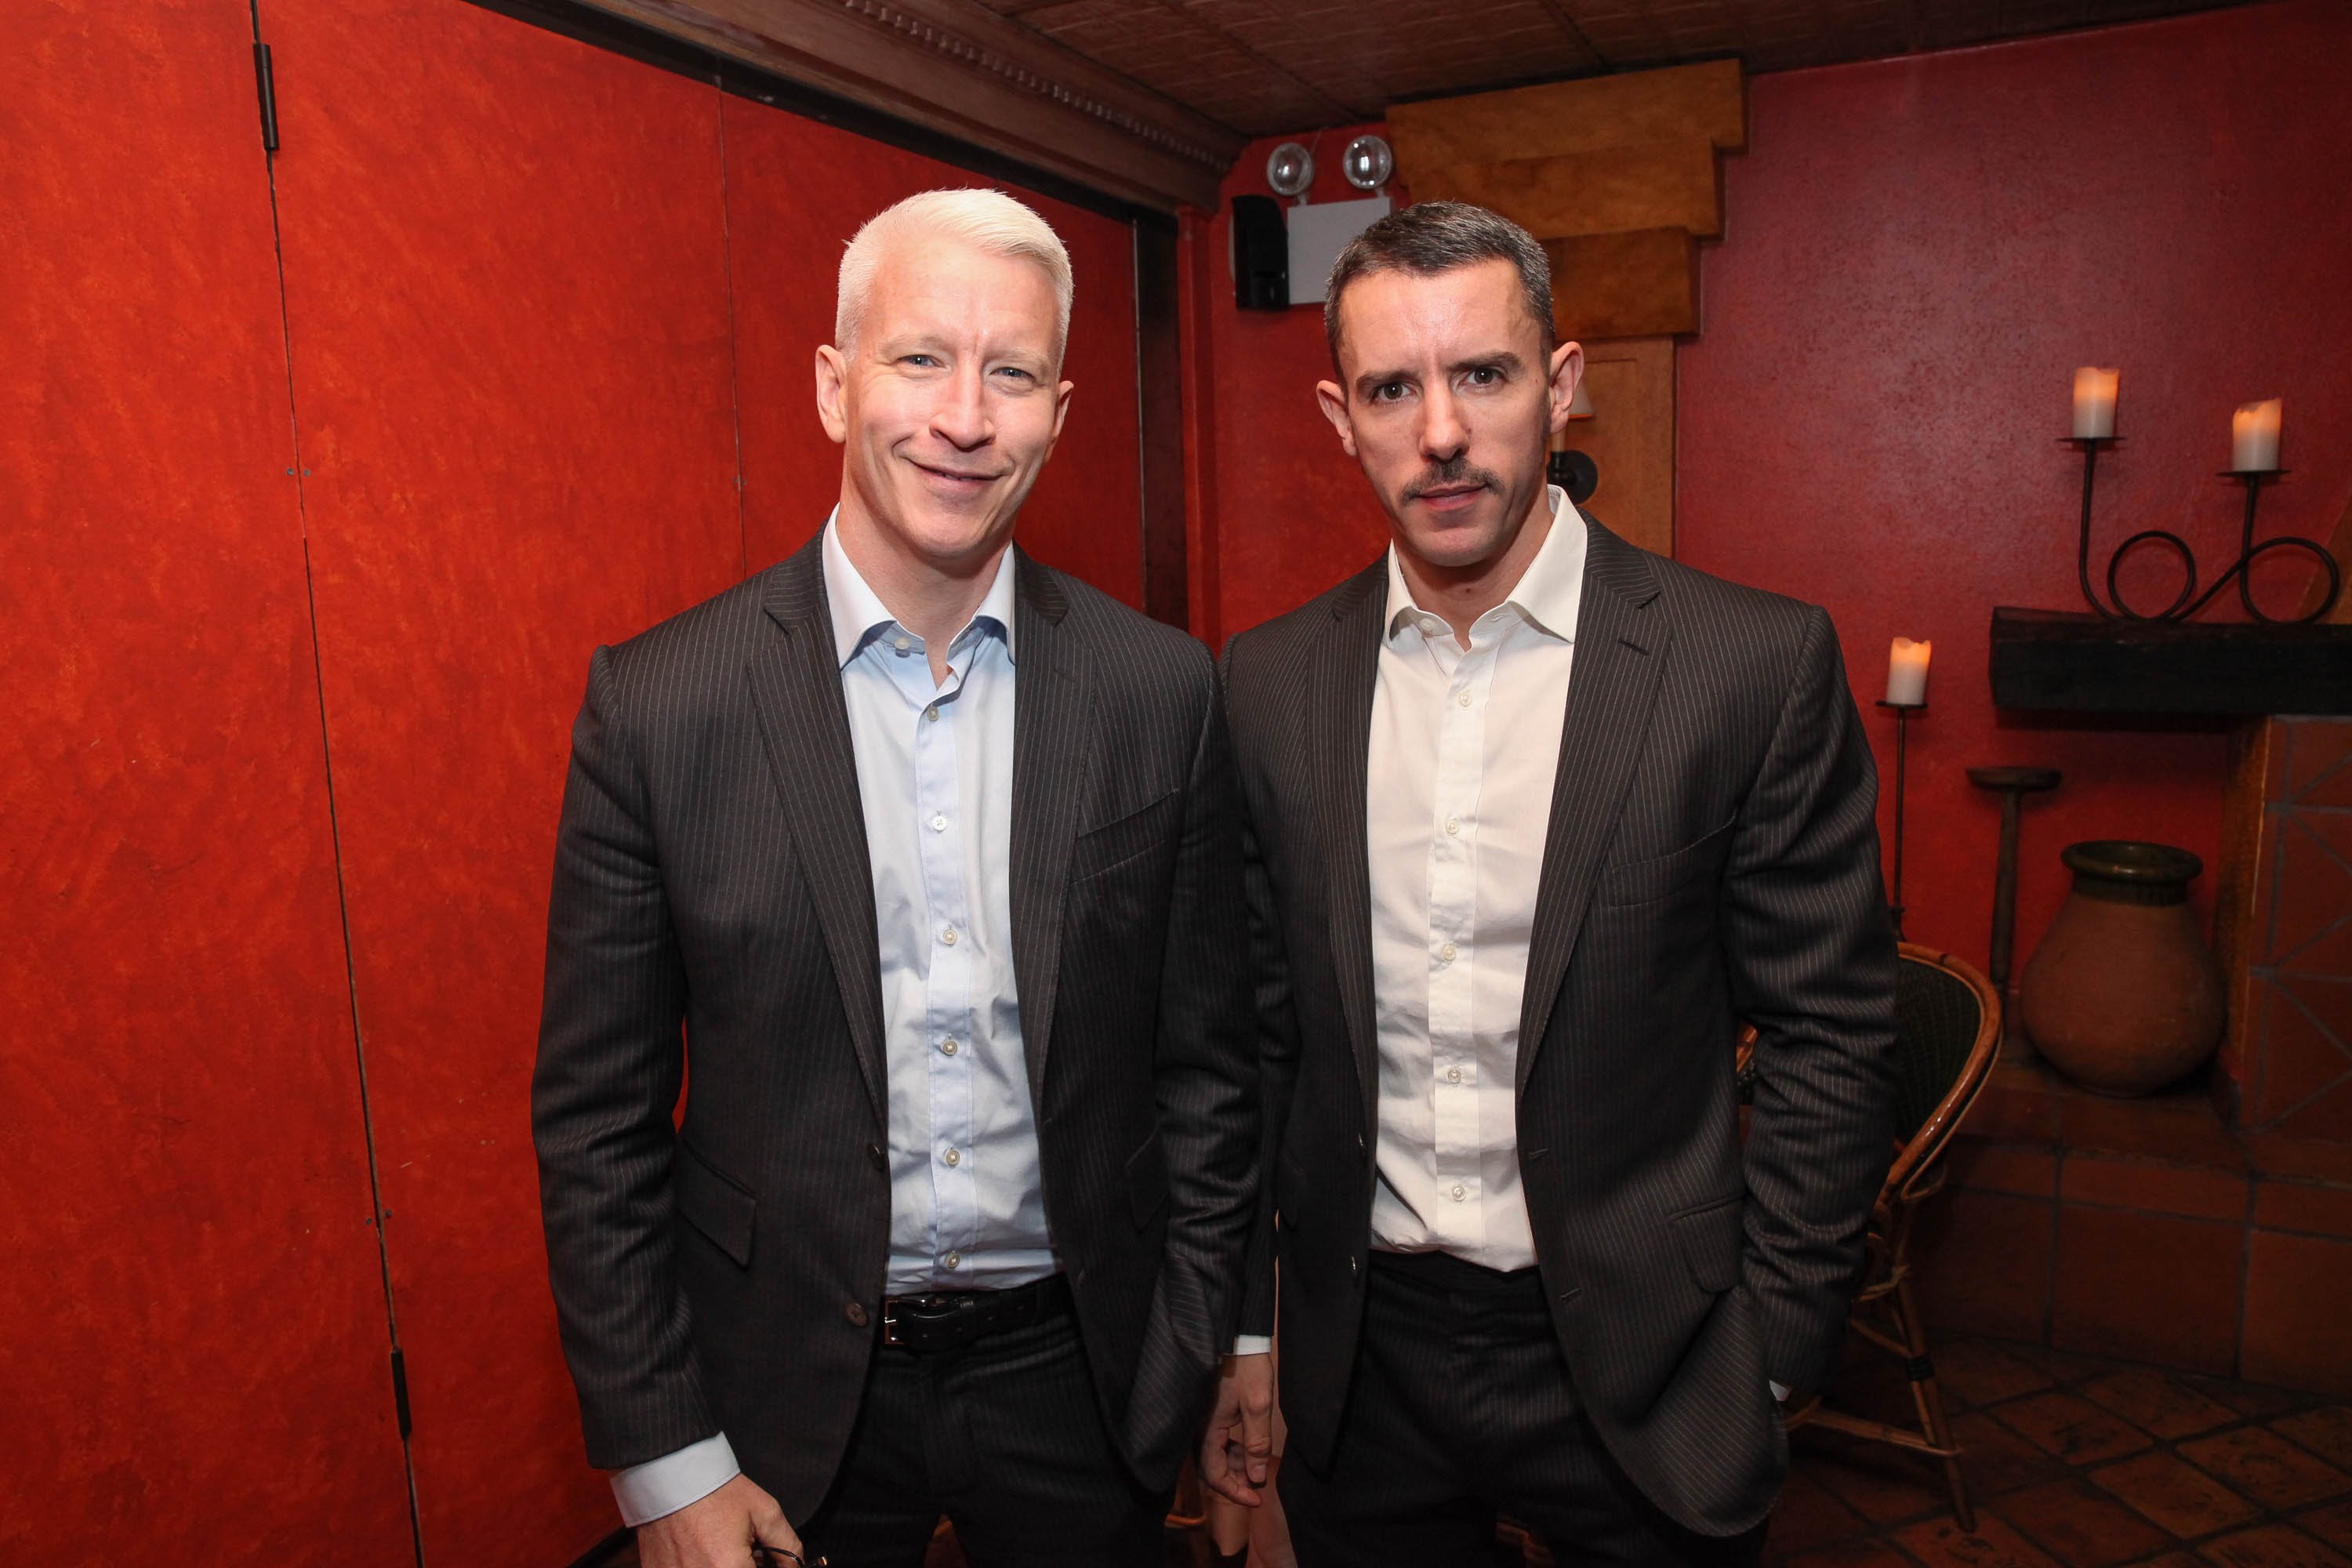 Anderson Cooper and Benjamin Maisani attend Kathy Griffin's Carnegie Hall Performance official after party on November 8, 2013, in New York City. | Source: Getty Images.